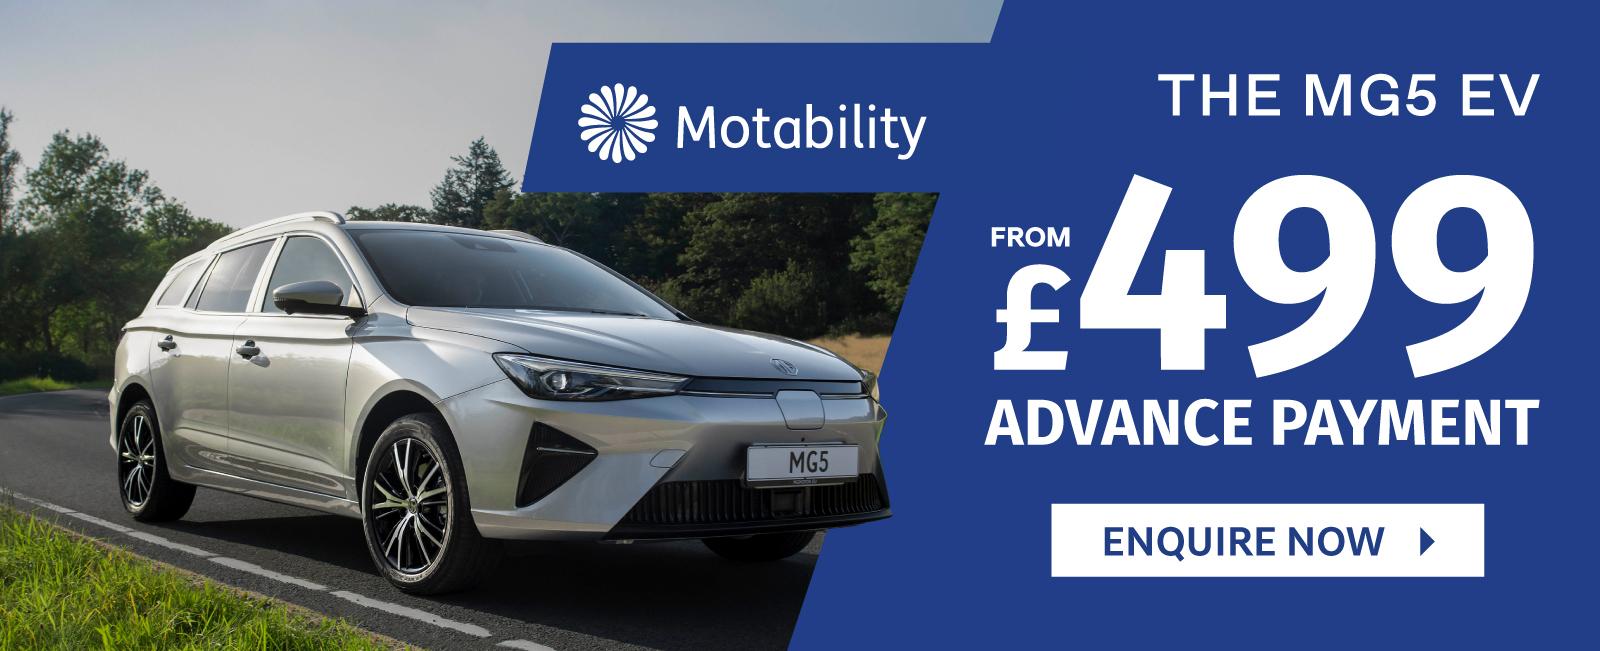 The MG5 EV on Motability Scheme from £499 Advance Payment